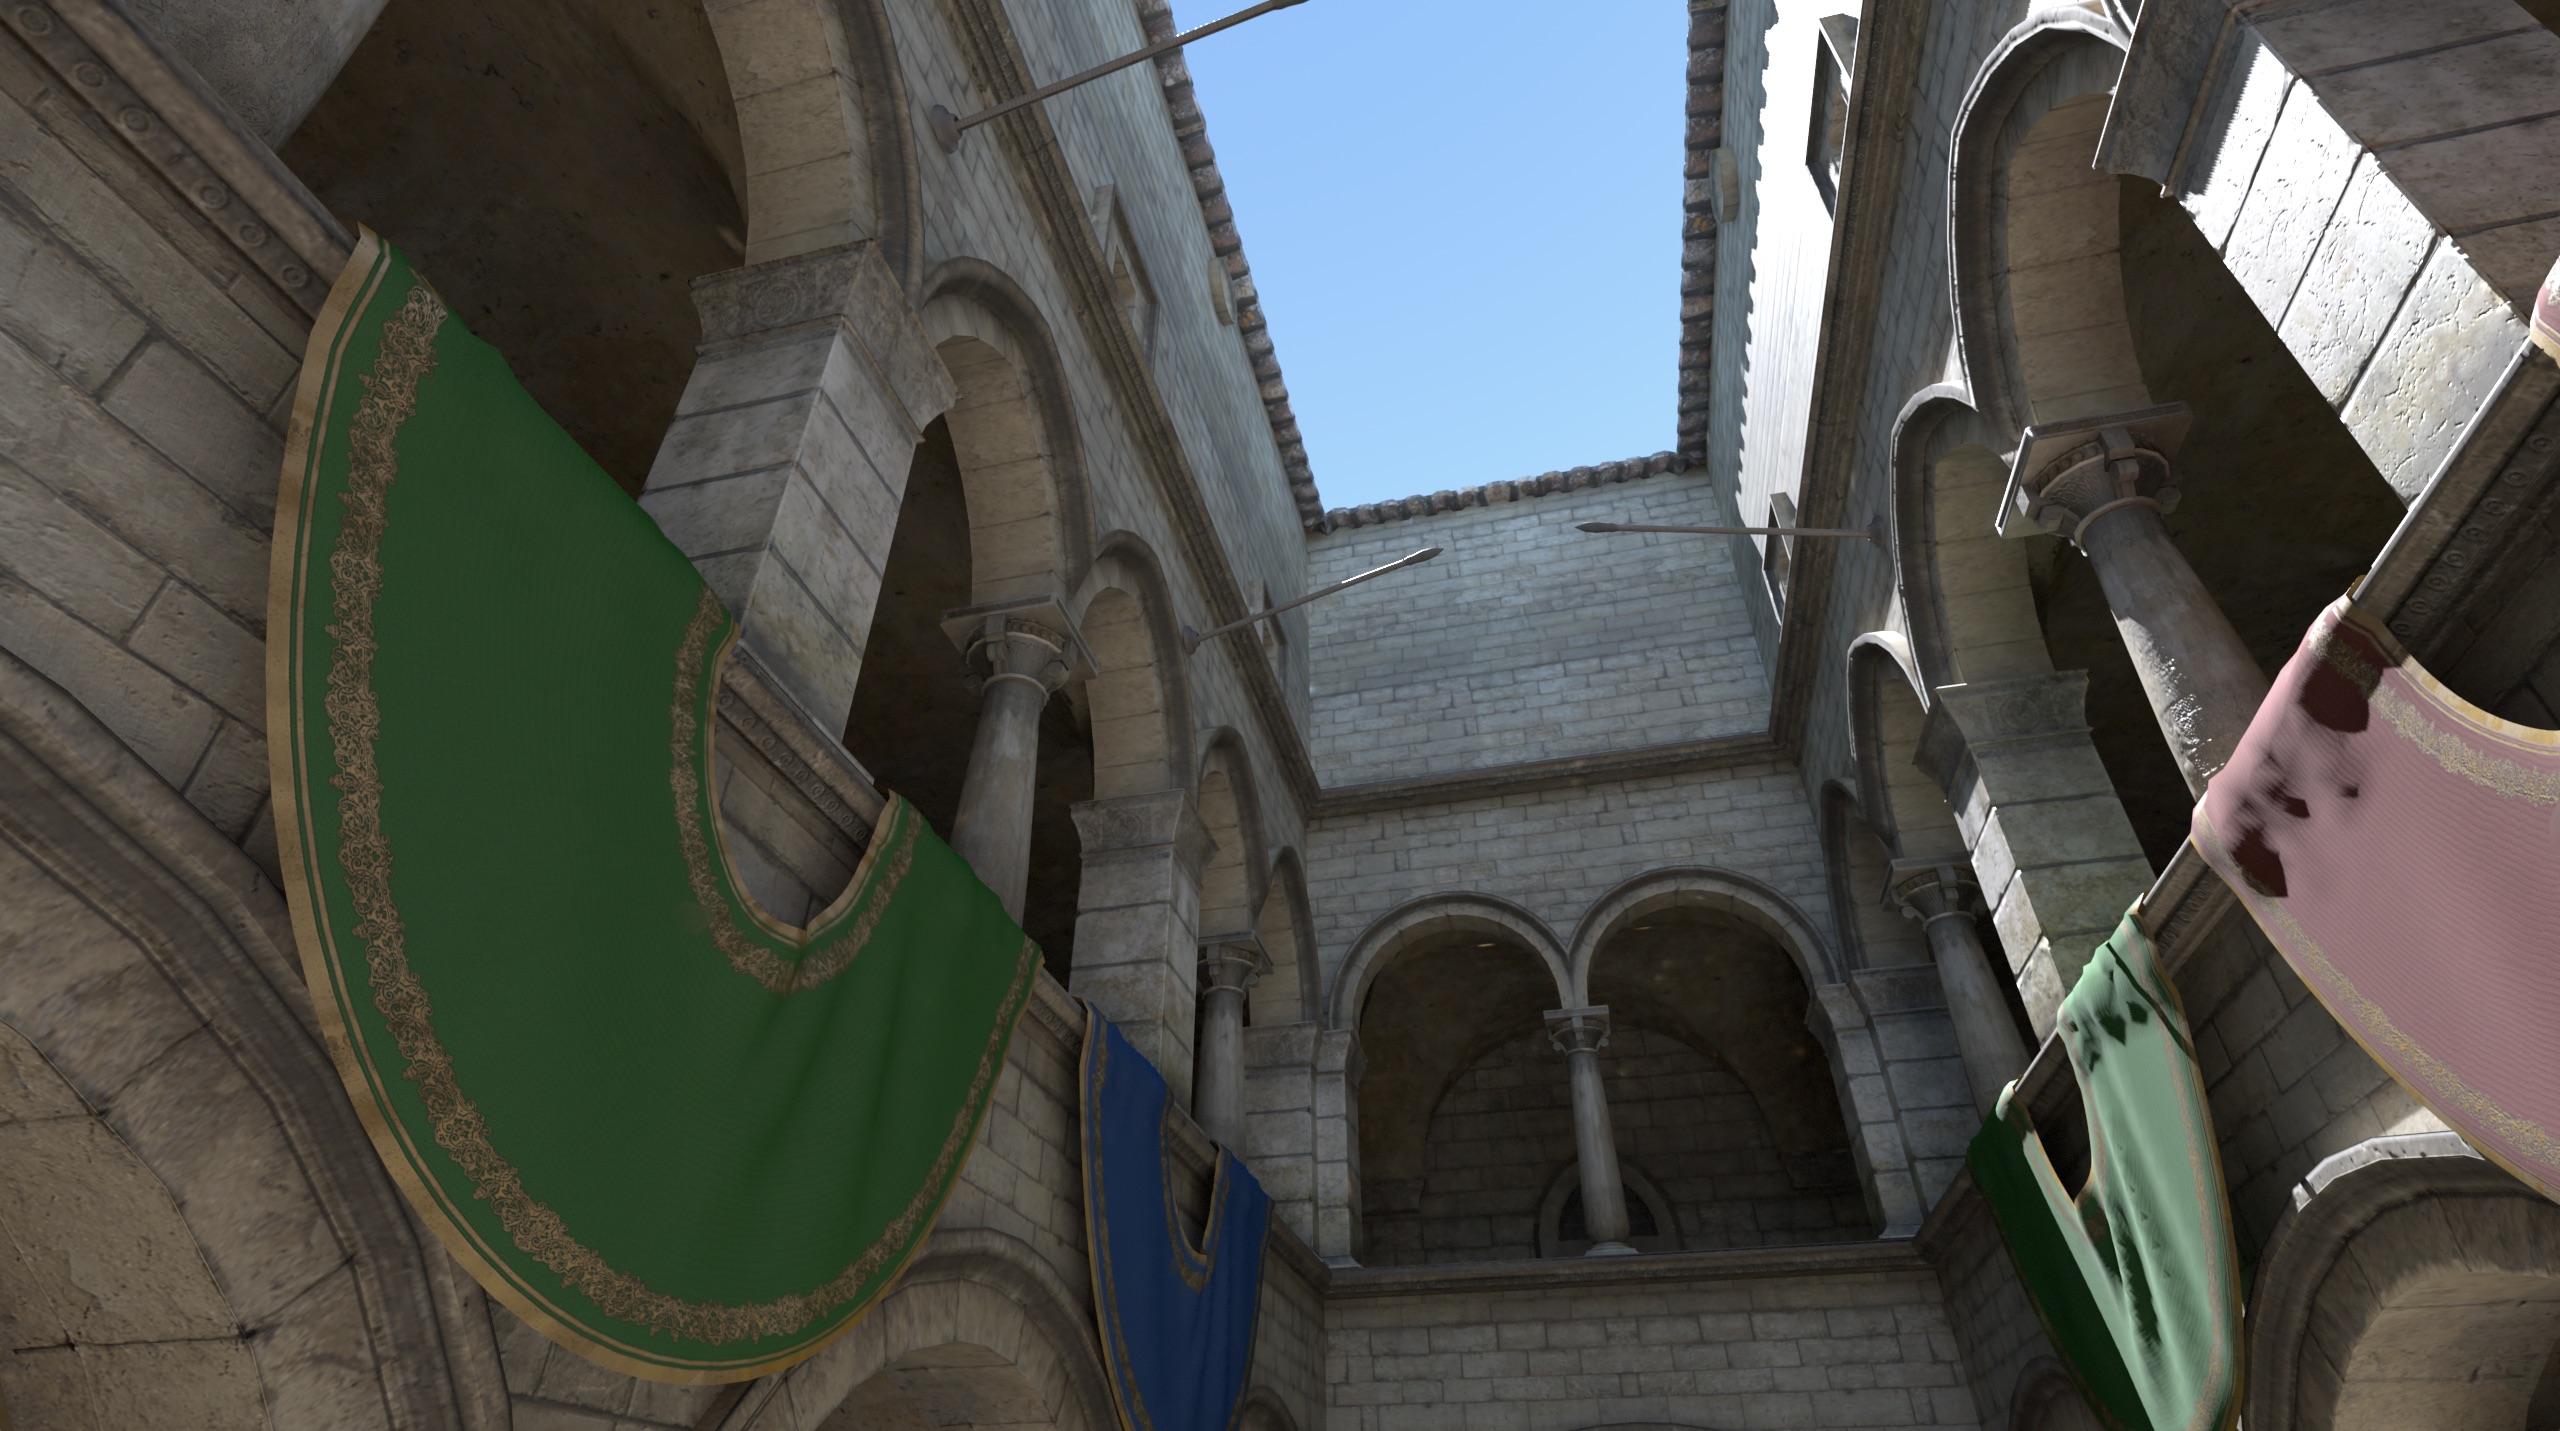 Sponza rendered using a hemispherical Ambient Dice lightmap for diffuse and specular